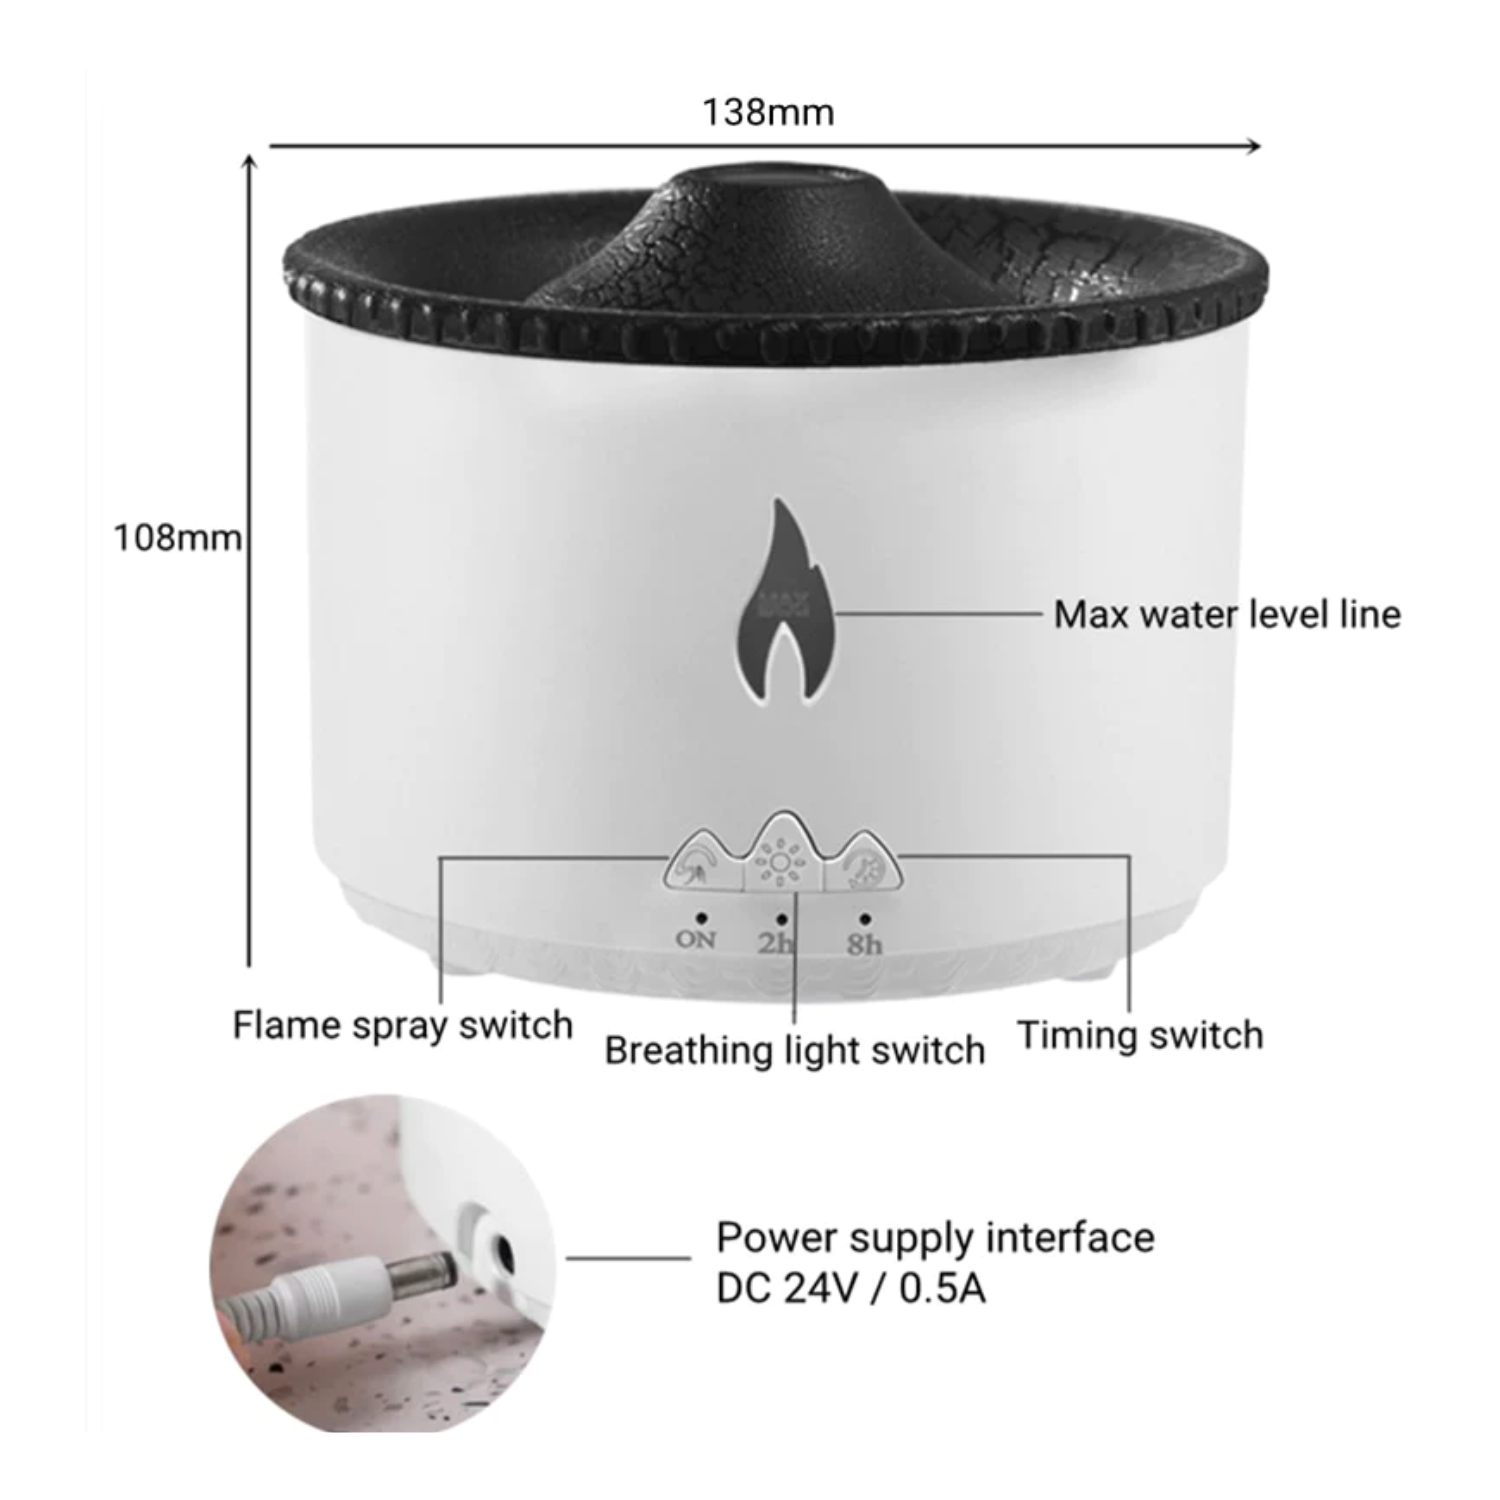 2022 New Creative Ultrasonic Essential Oil Humidifier Volcano Aromatherapy Machine Spray Jellyfish Air Flame Humidifier Diffuser